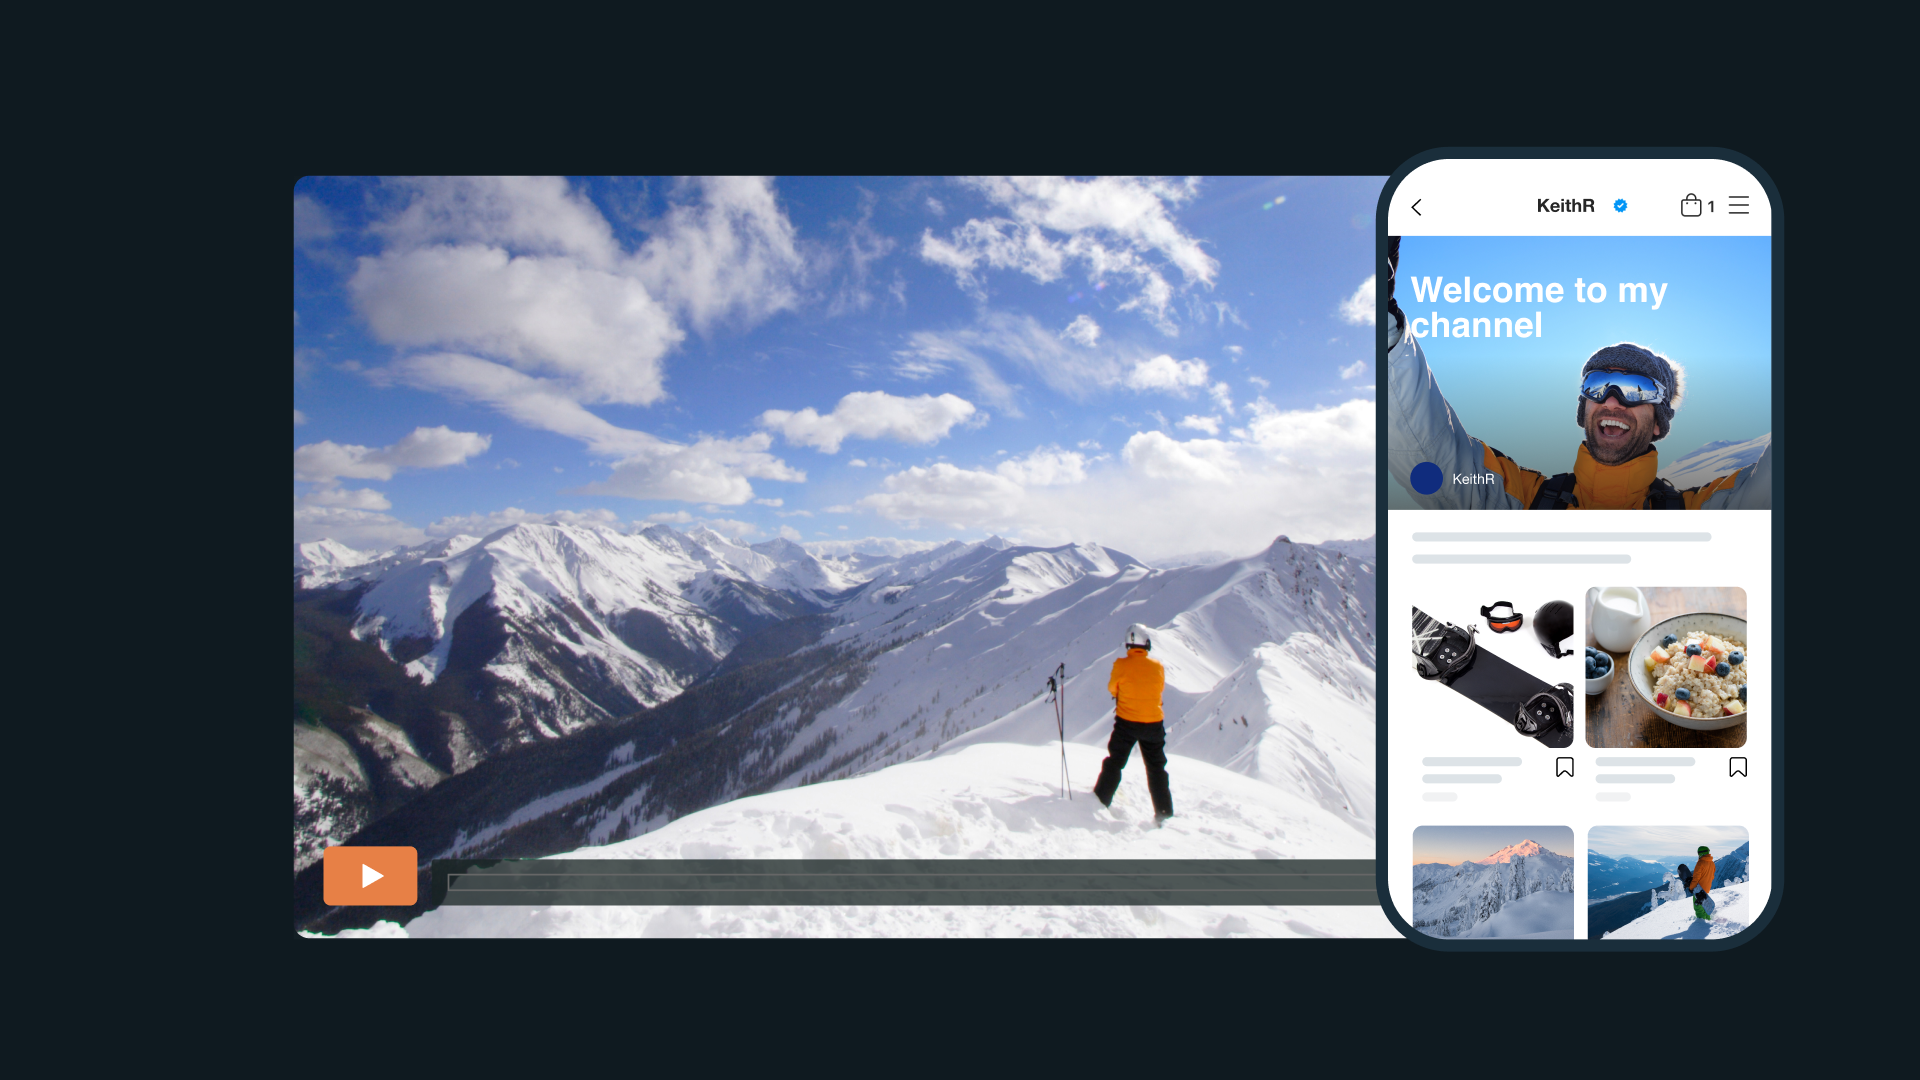 Skier's streaming channel on mobile and desktop.